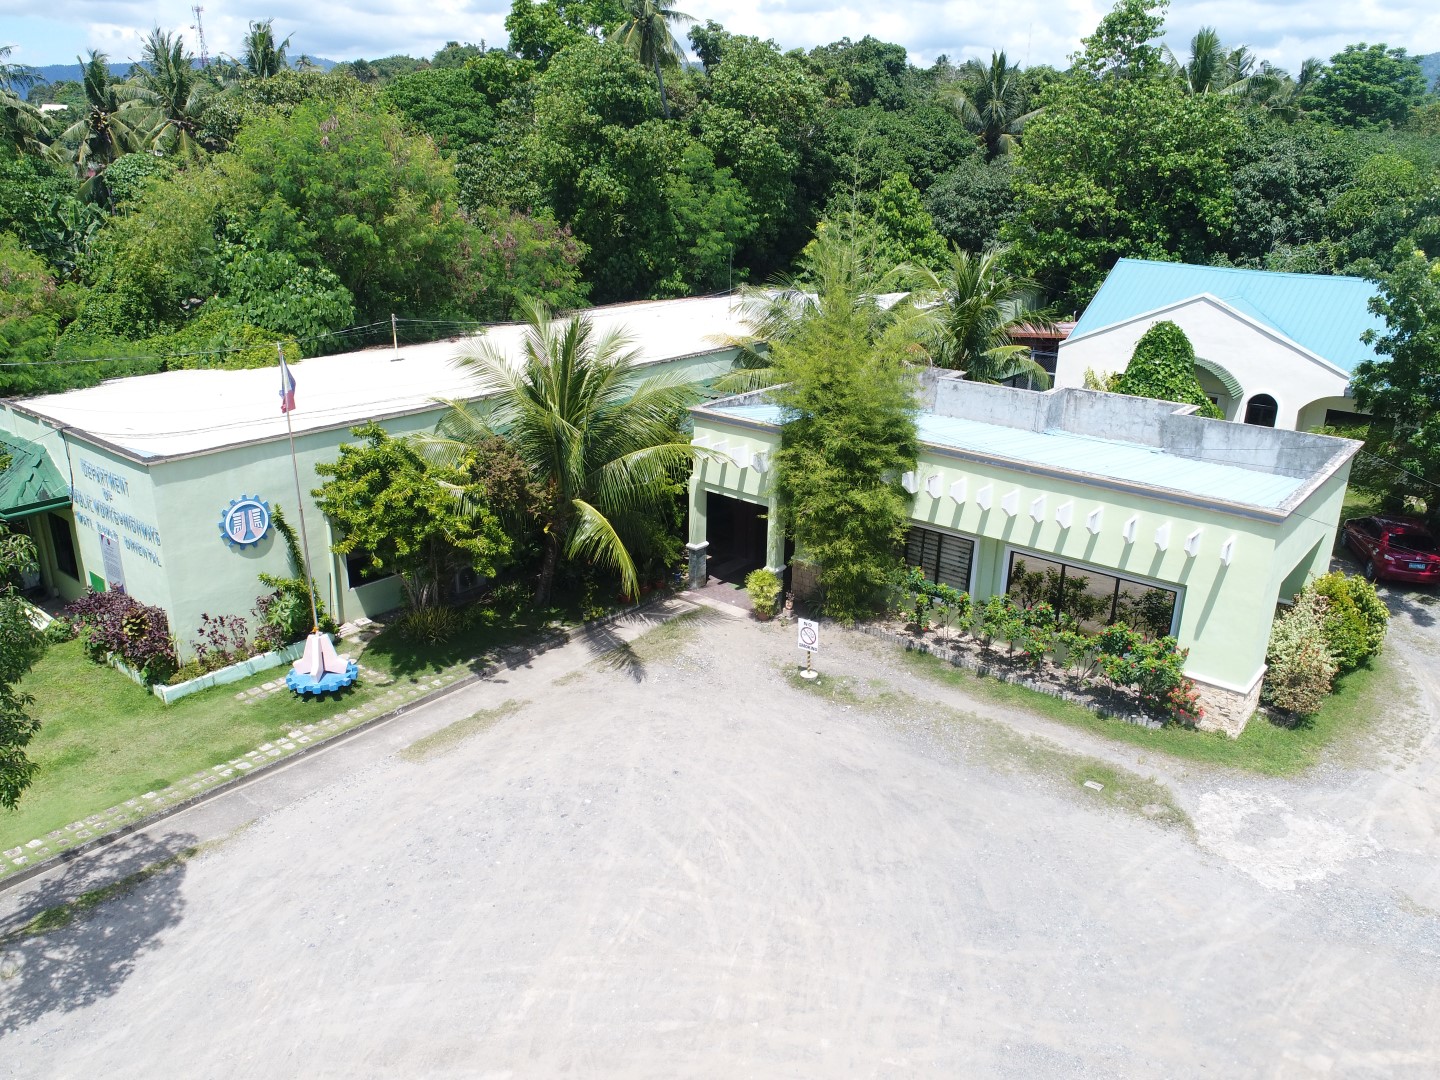 dpwh-davao-oriental-2nd-district-engineer-officephotos-1